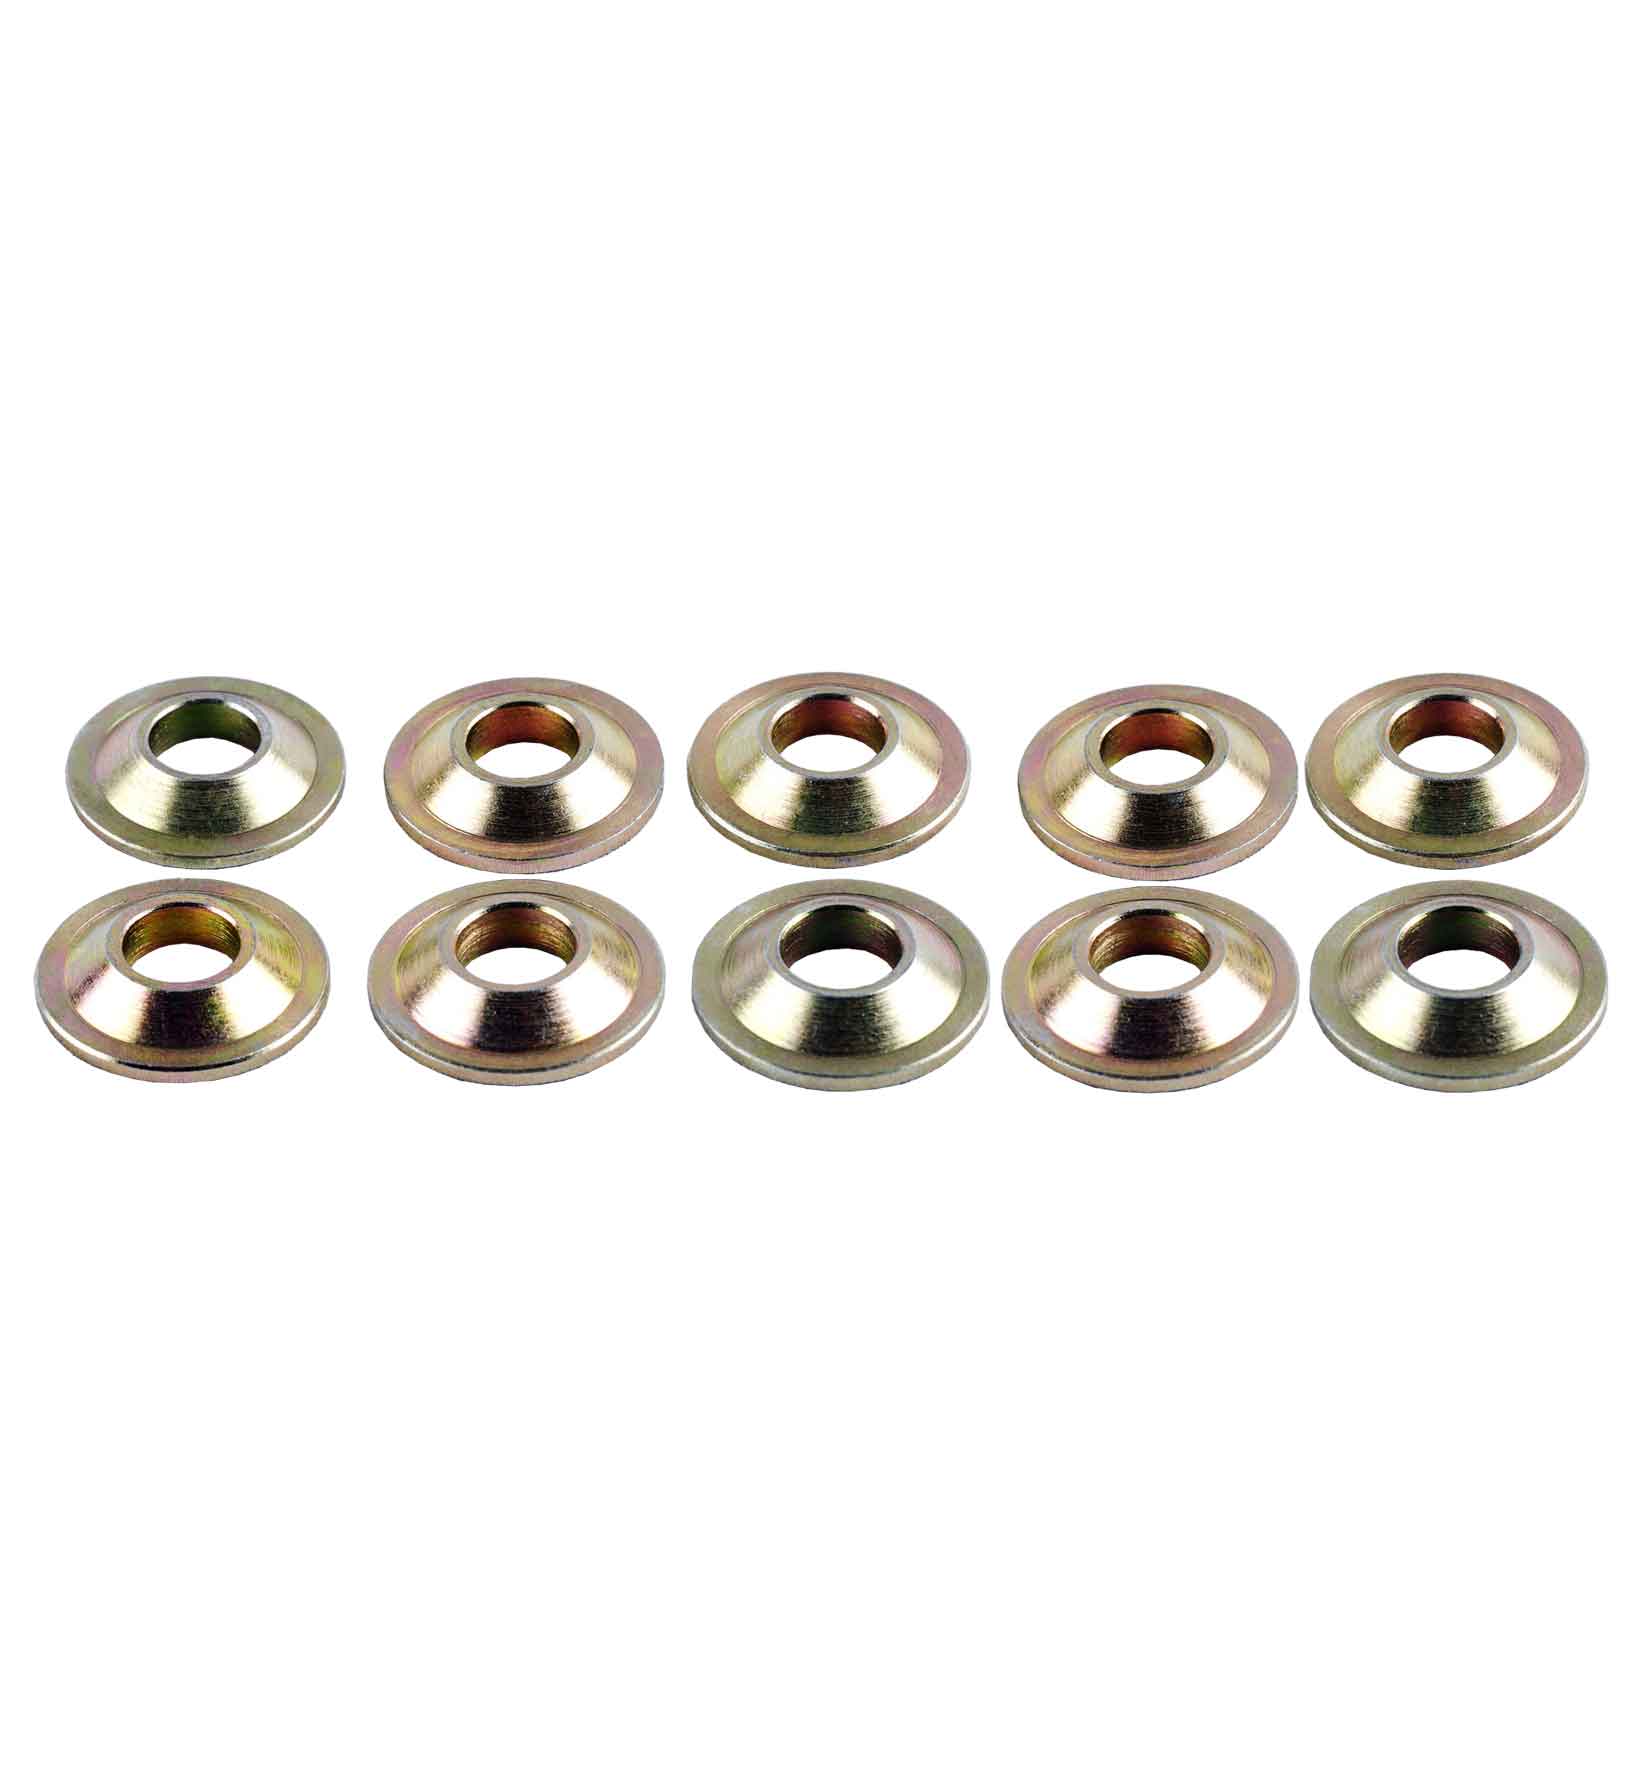 7/16" Rose Joint Misalignment Spacers (Pack of 10)